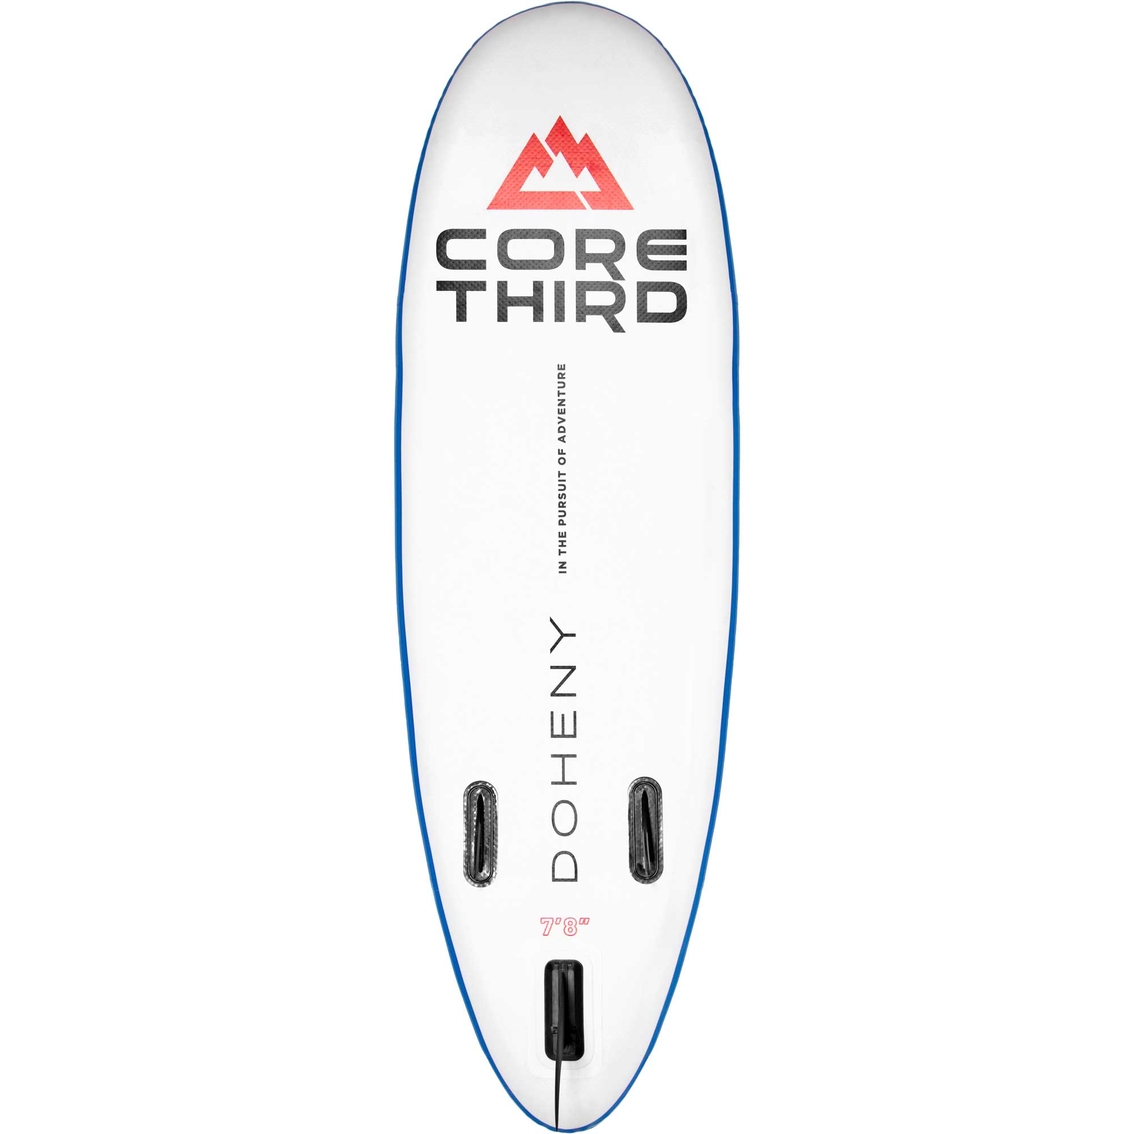 Core Third Doheny Inflatable Paddle Board - Image 4 of 8